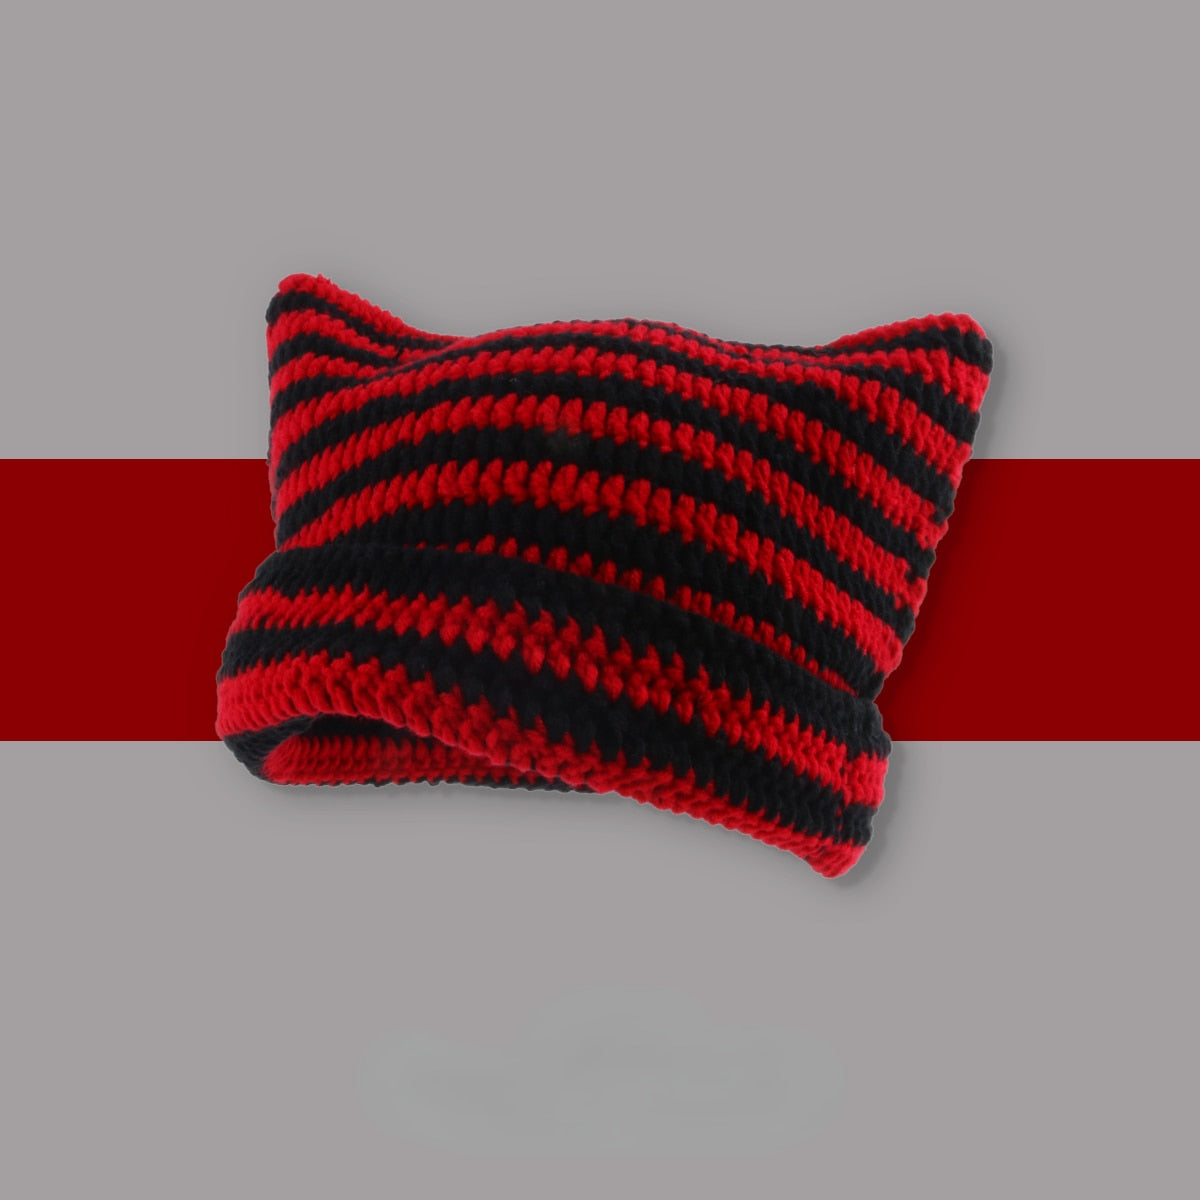 Beanie with Cat Ears - Red and Black / 56-58cm - Cat beanie